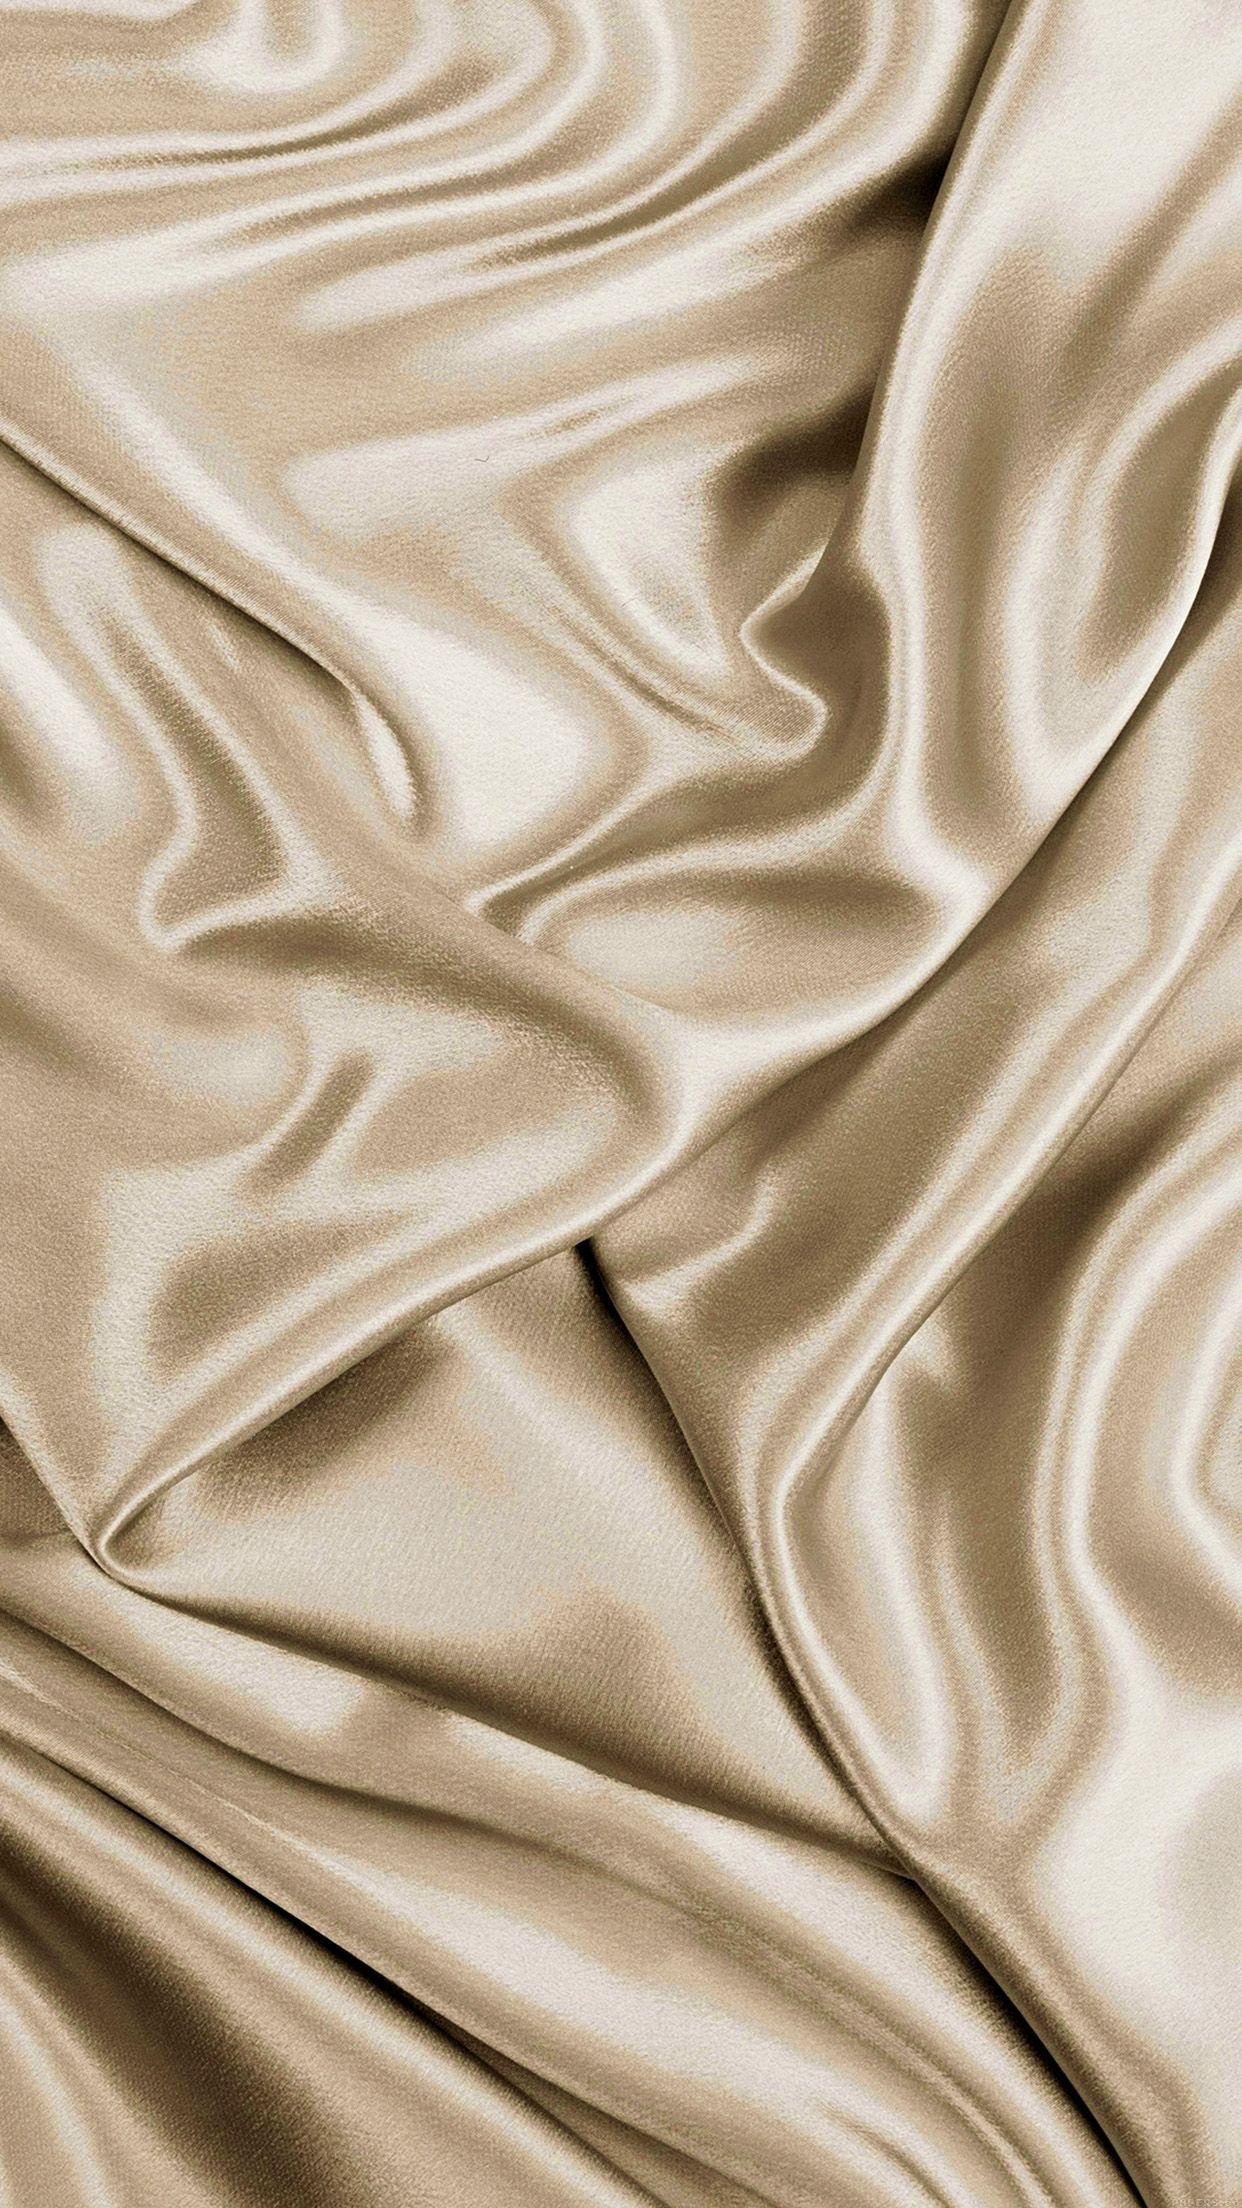 IPhone wallpaper of a close up of a beige colored silk material. - Silk